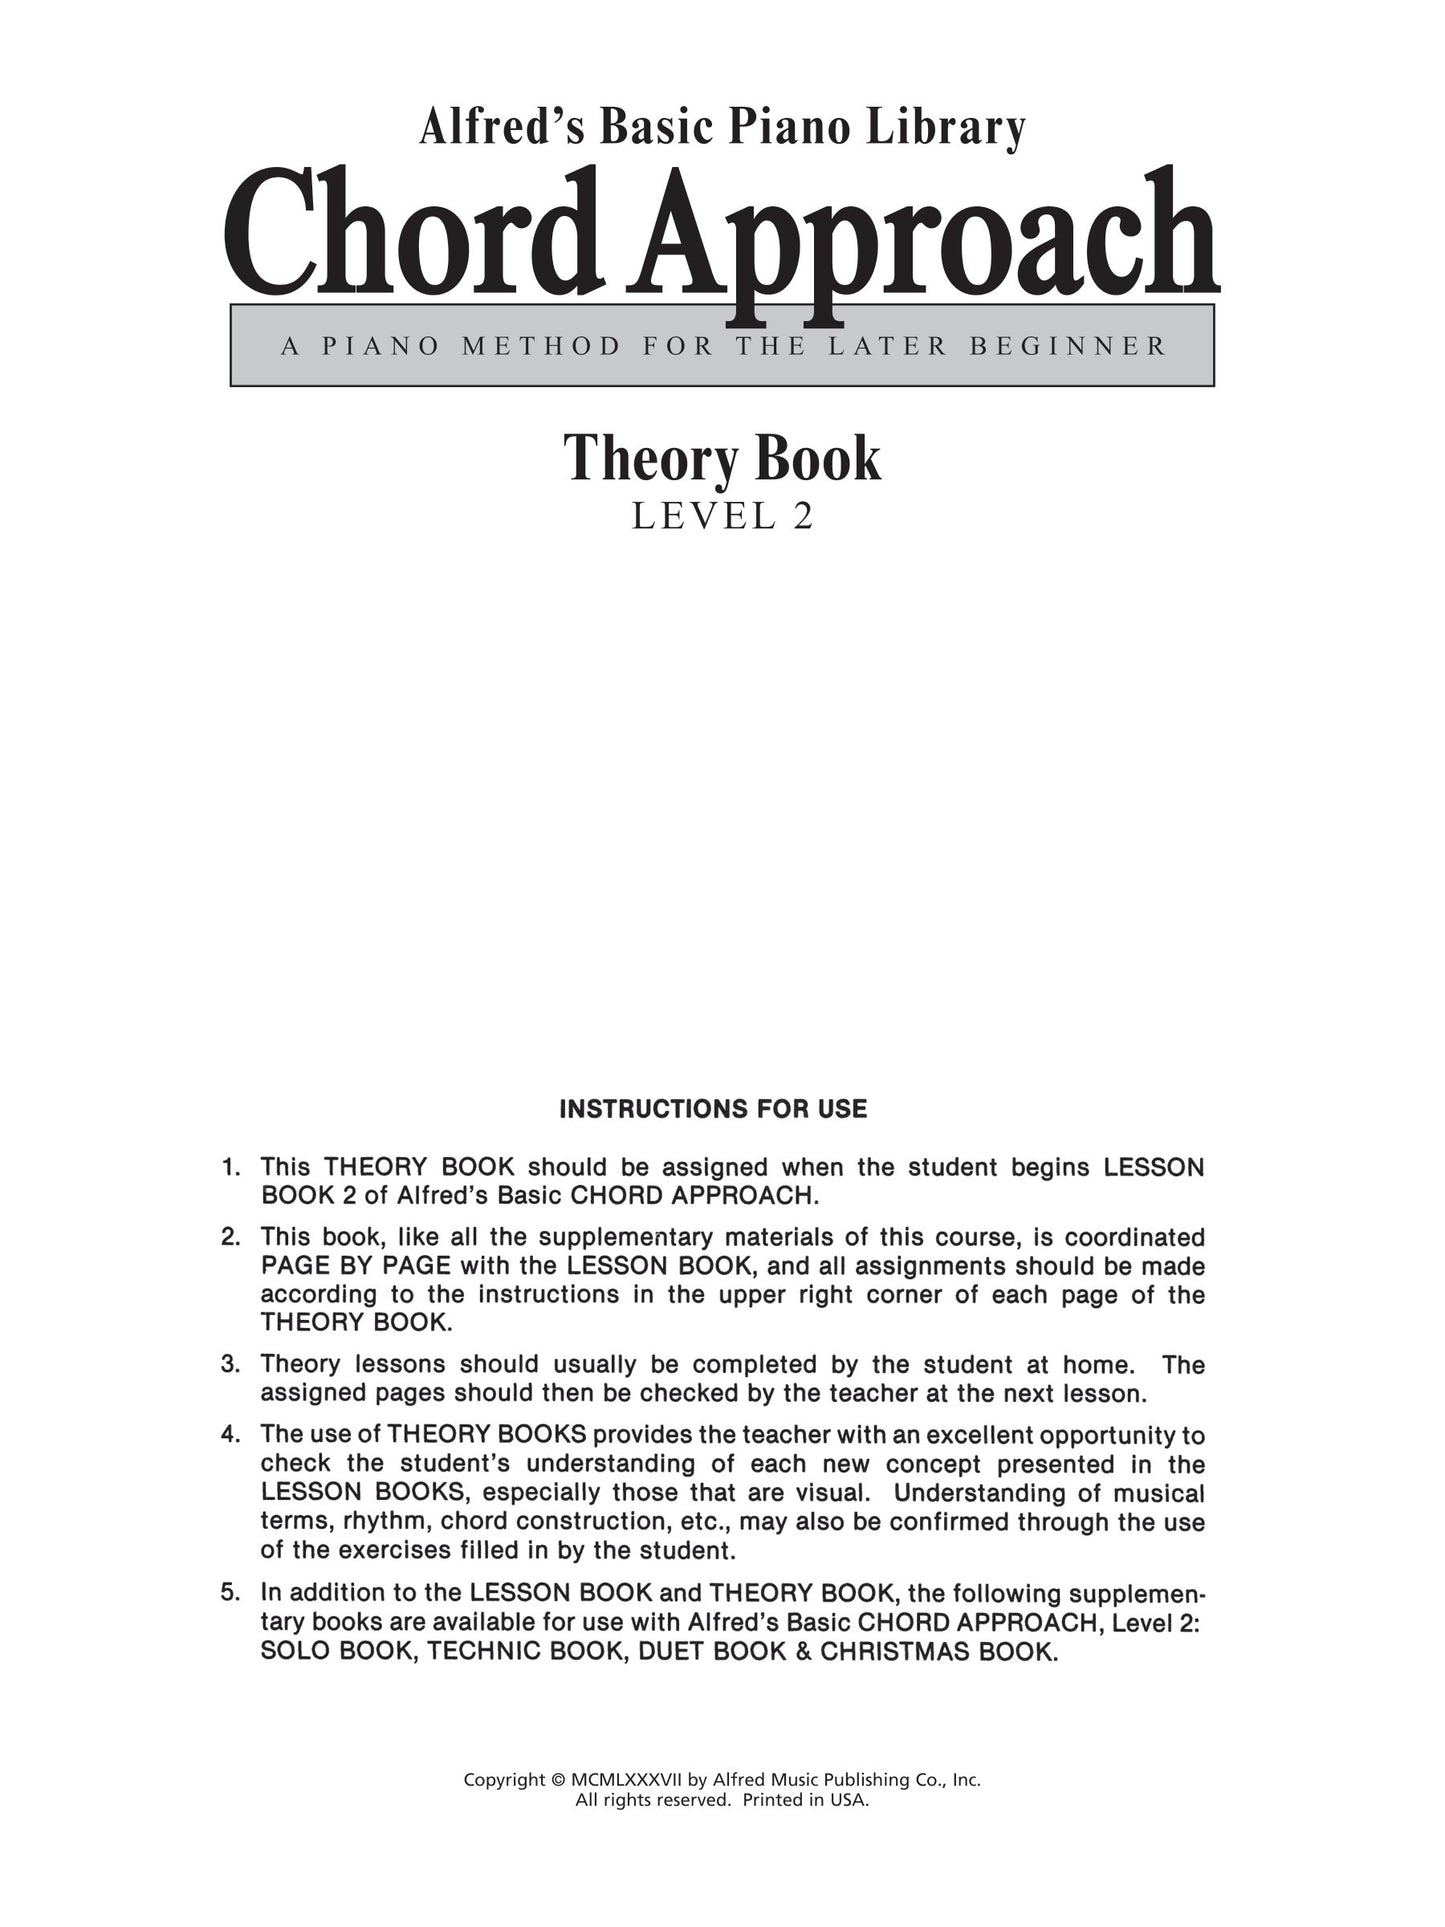 Alfred's Basic Piano Library - Chord Approach Theory Book Level 2